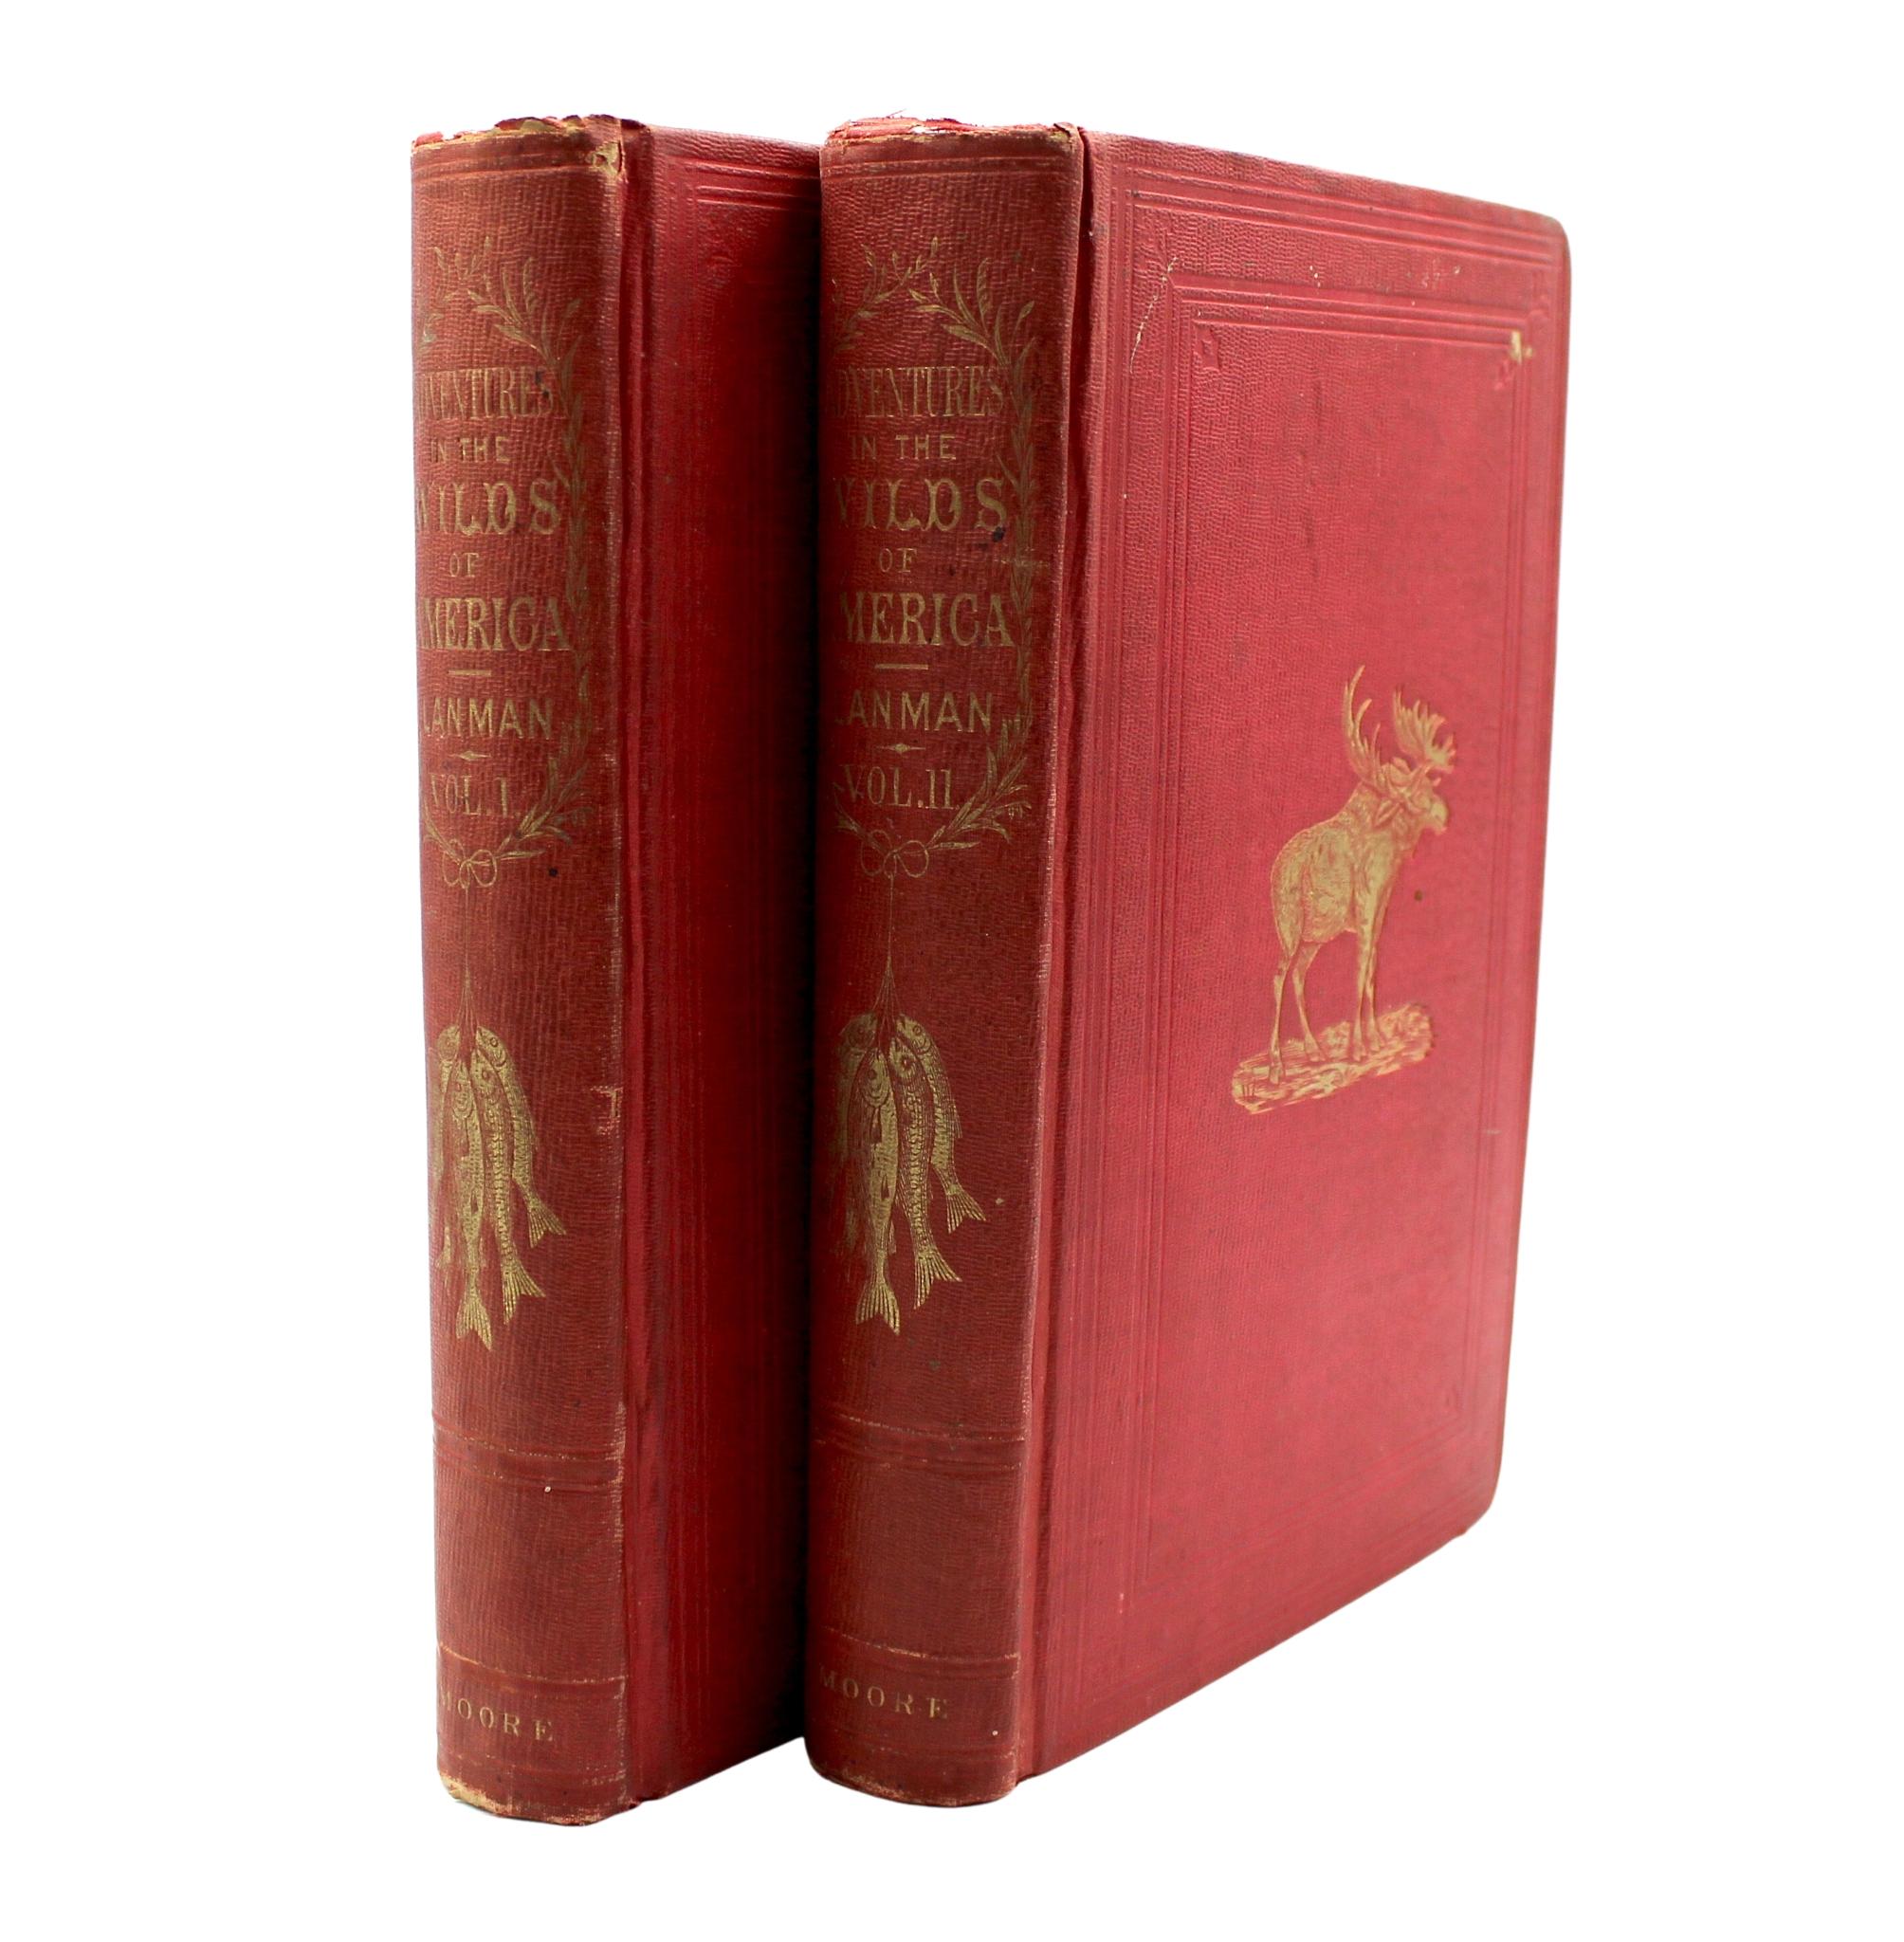 Adventures in the Wilds of the United States, by Charles Lanman, 1856 4